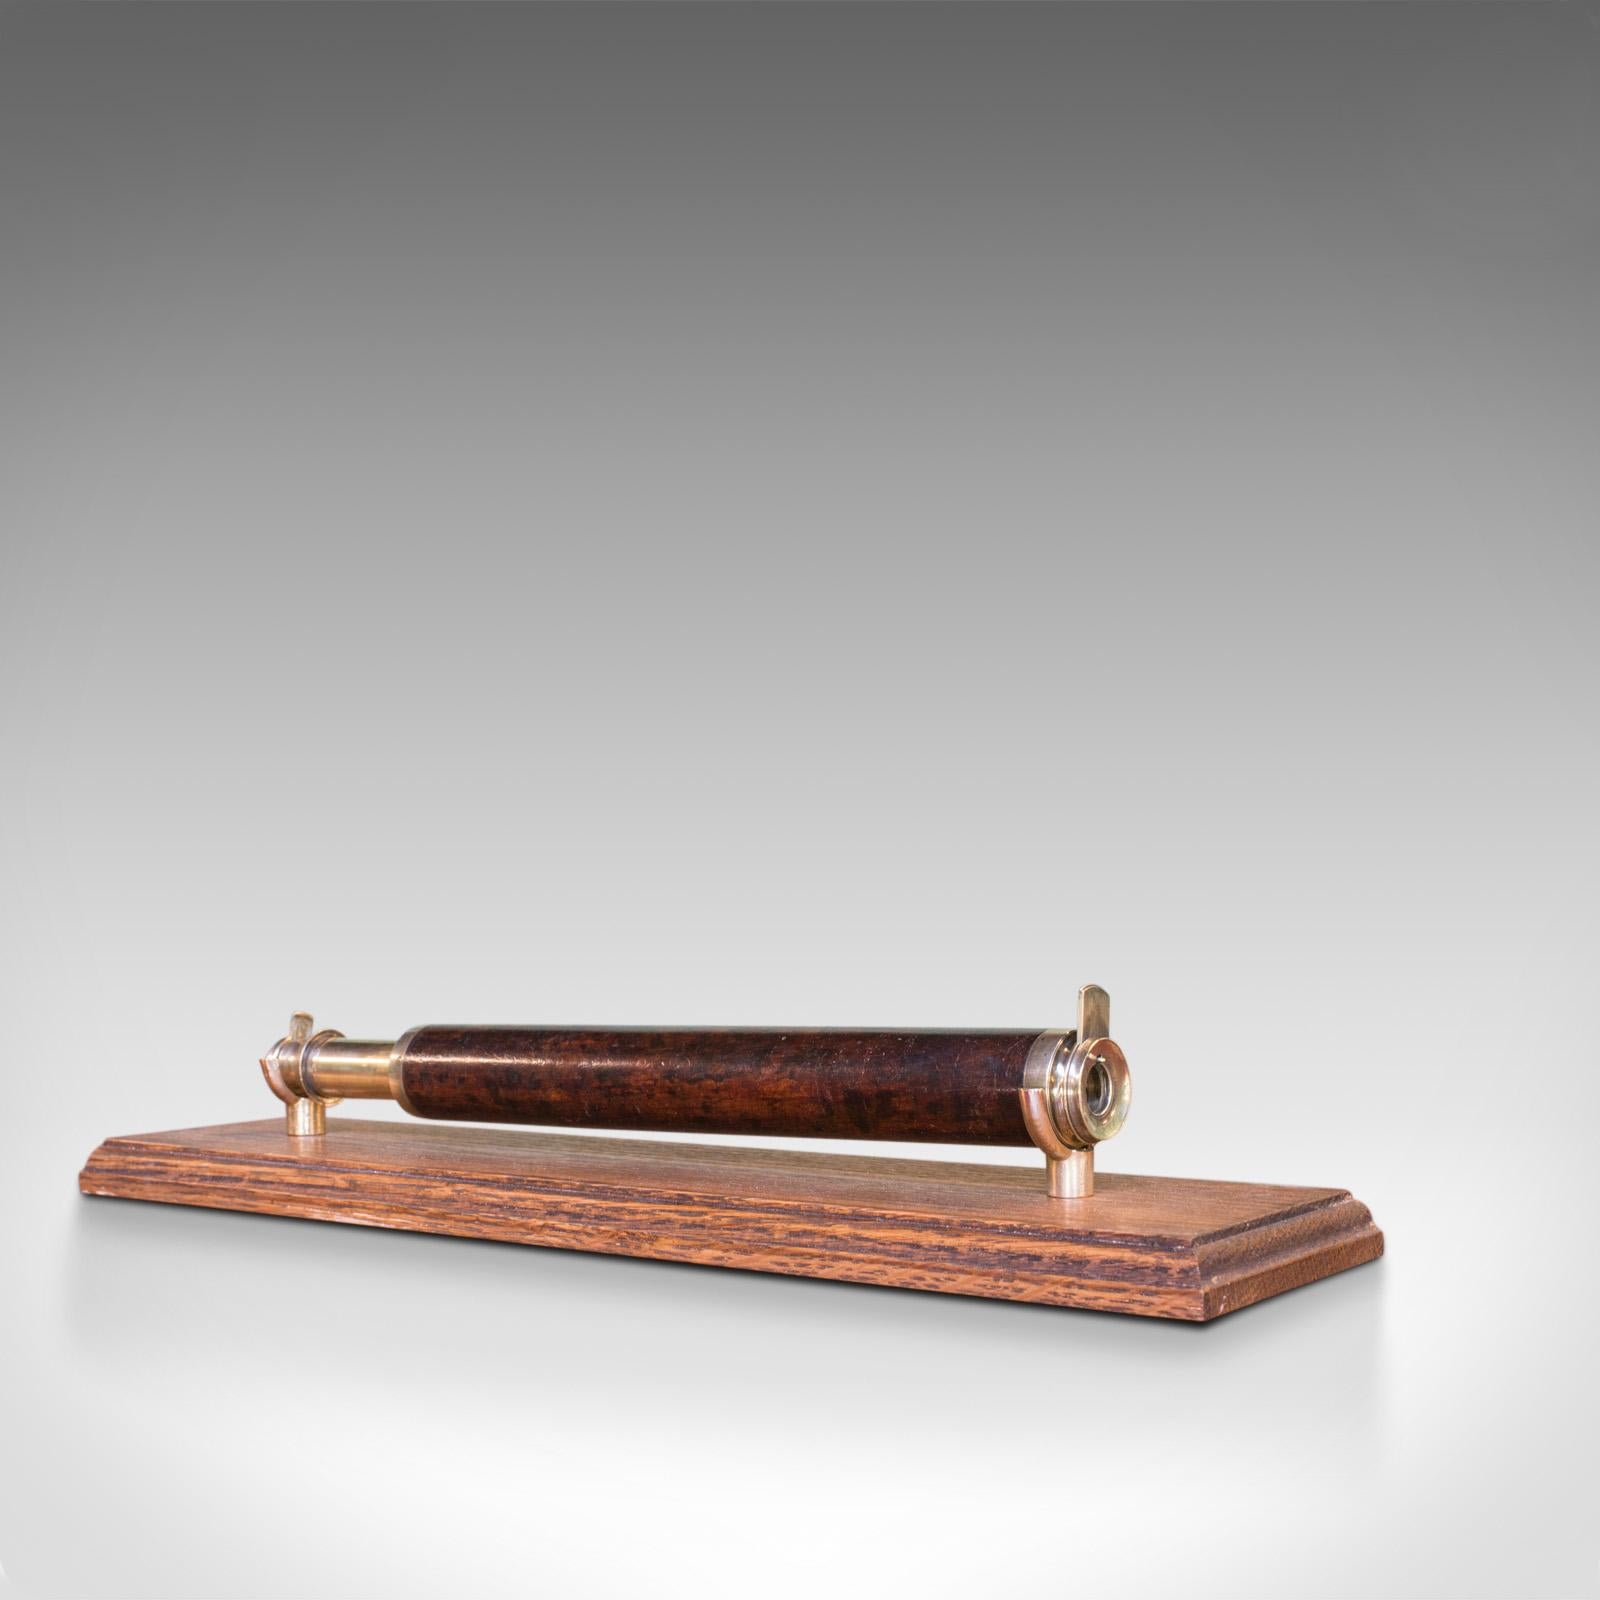 This is an antique telescope, an English single draw refractor for terrestrial or astronomical use from the Georgian period and dating to mid-18th century, circa 1760.

Perfect for bird watching, landscape appreciation, wildlife, or maritime